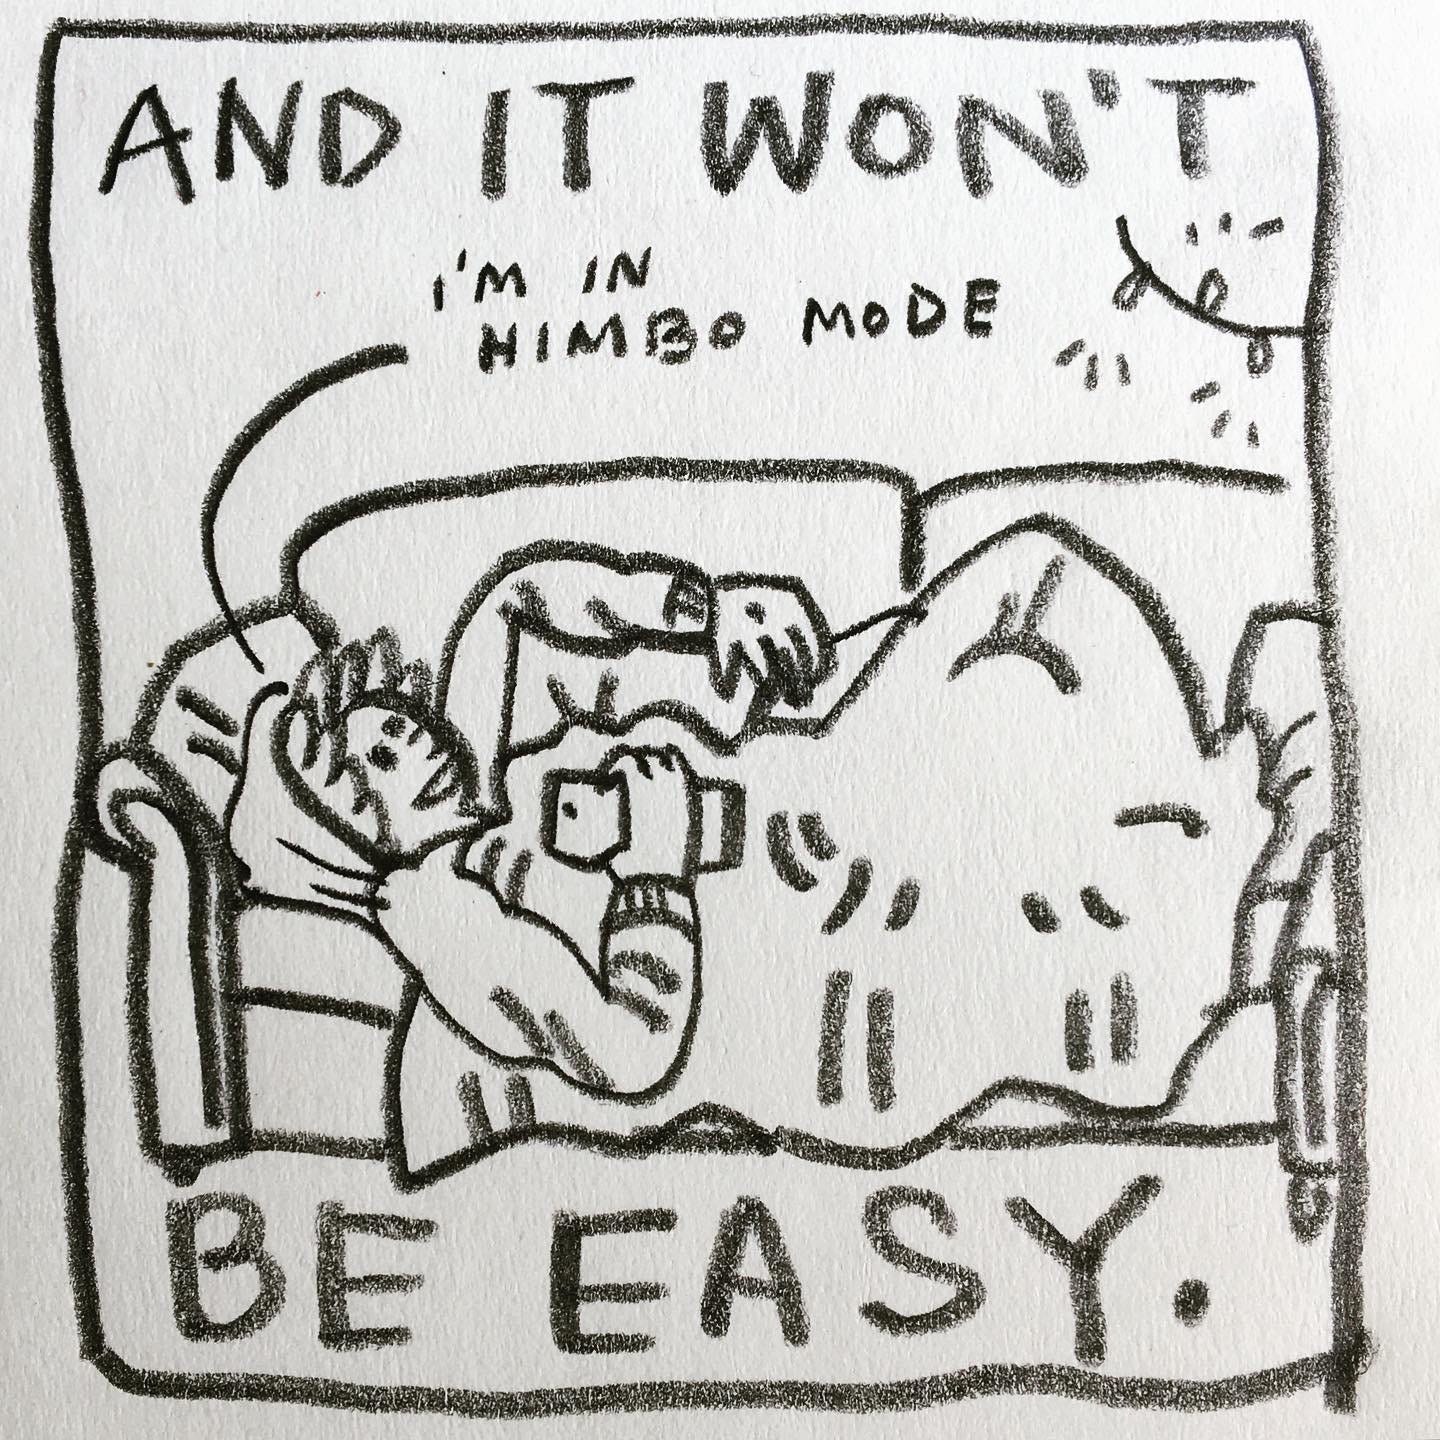 Panel 2: and it won't be easy. Image: Lark lies under a blanket on the sofa wearing a hoodie and holding their phone. Christmas lights in the background. Lark says, “I’m in himbo mode.”